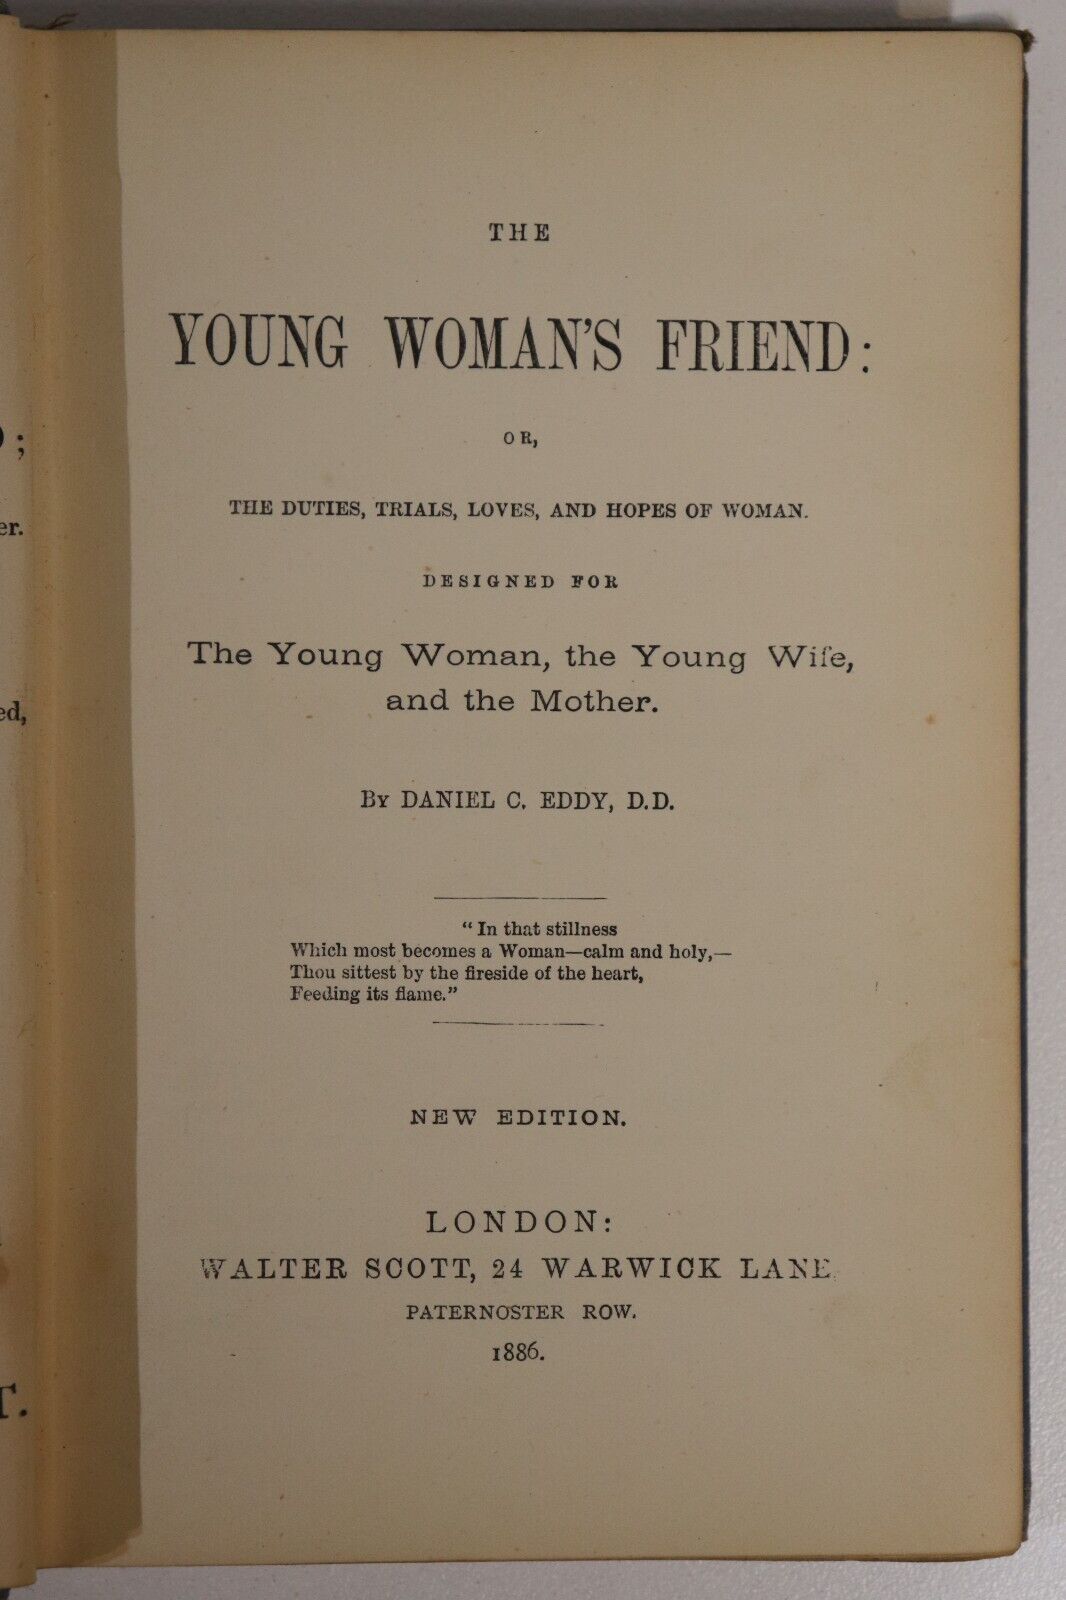 The Young Woman's Friend by D.C. Eddy - 1886 - Antique Social Commentary Book